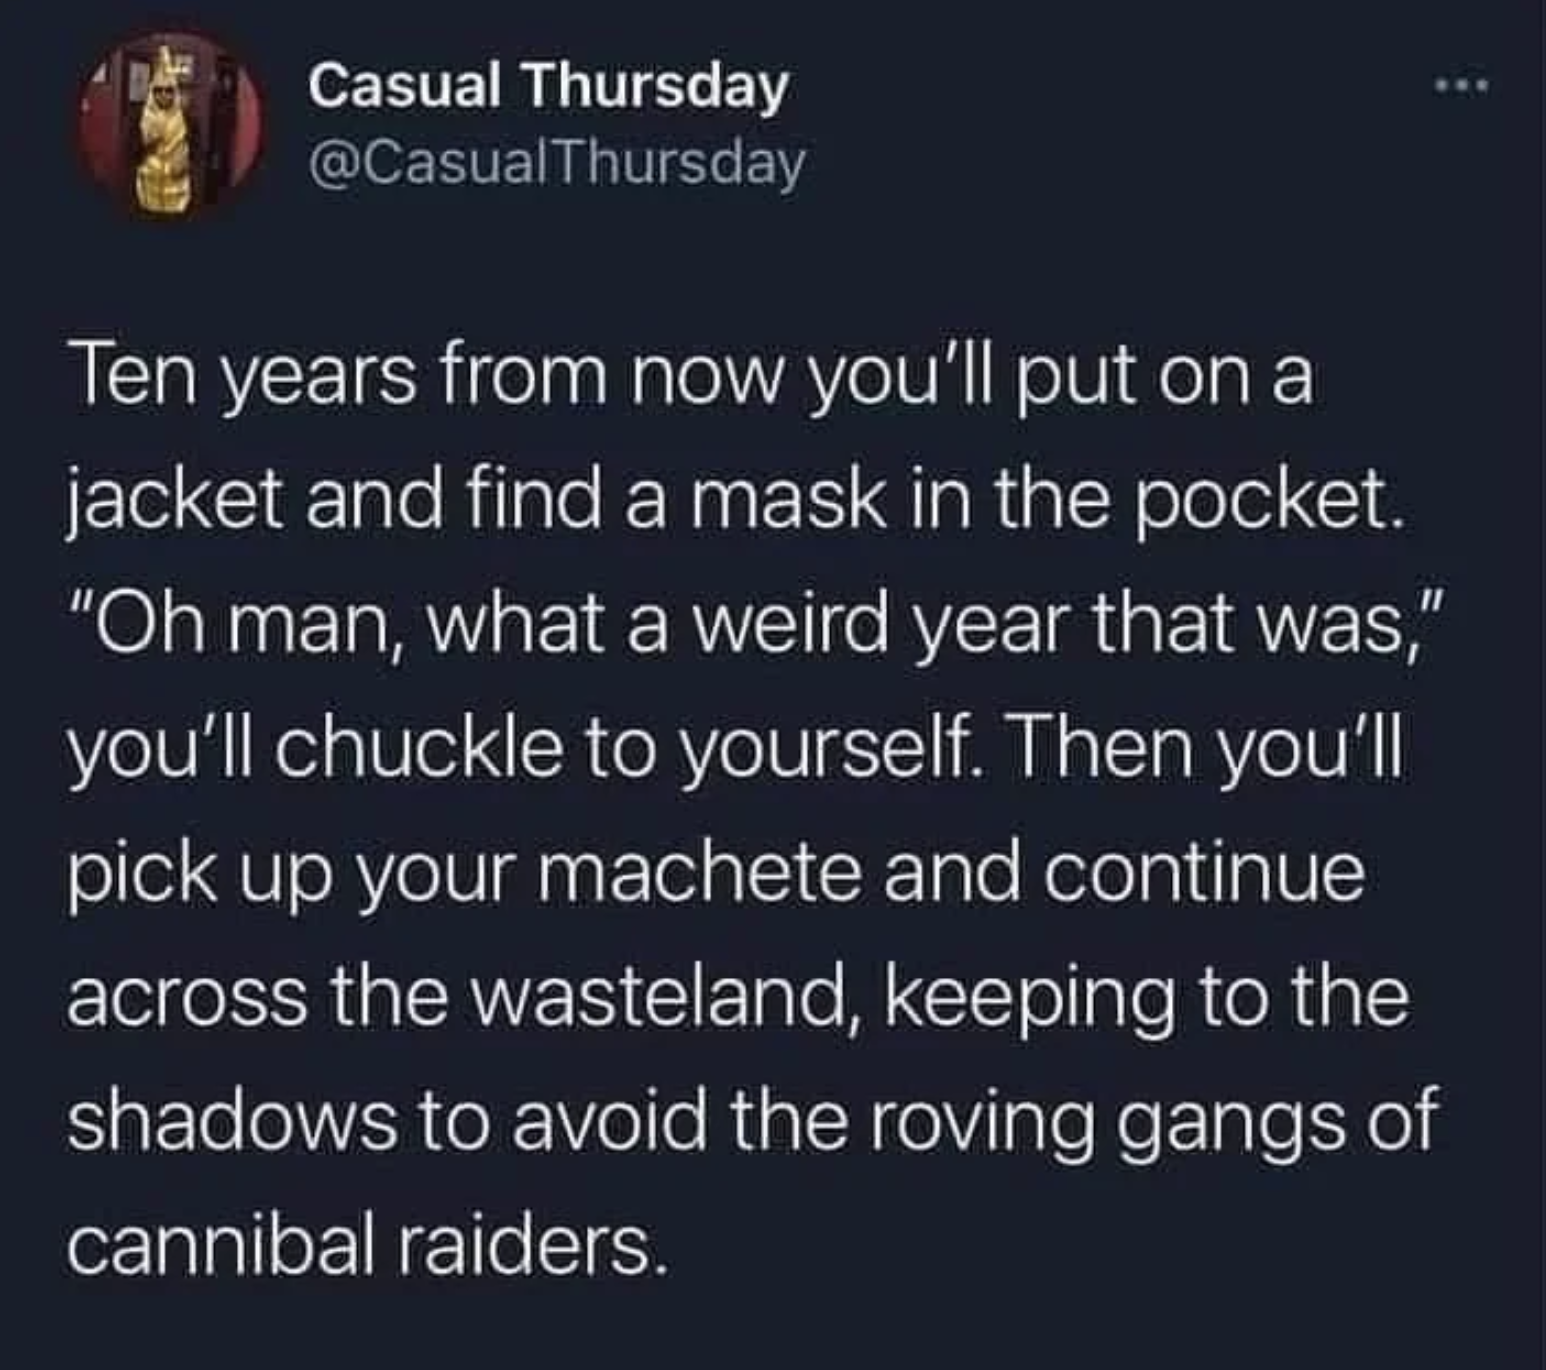 Casual Thursday Ten years from now you'll put on a jacket and find a mask in the pocket. "Oh man, what a weird year that was," you'll chuckle to yourself. Then you'll pick up your machete and continue across the wasteland, keeping to the shadows to avoid…